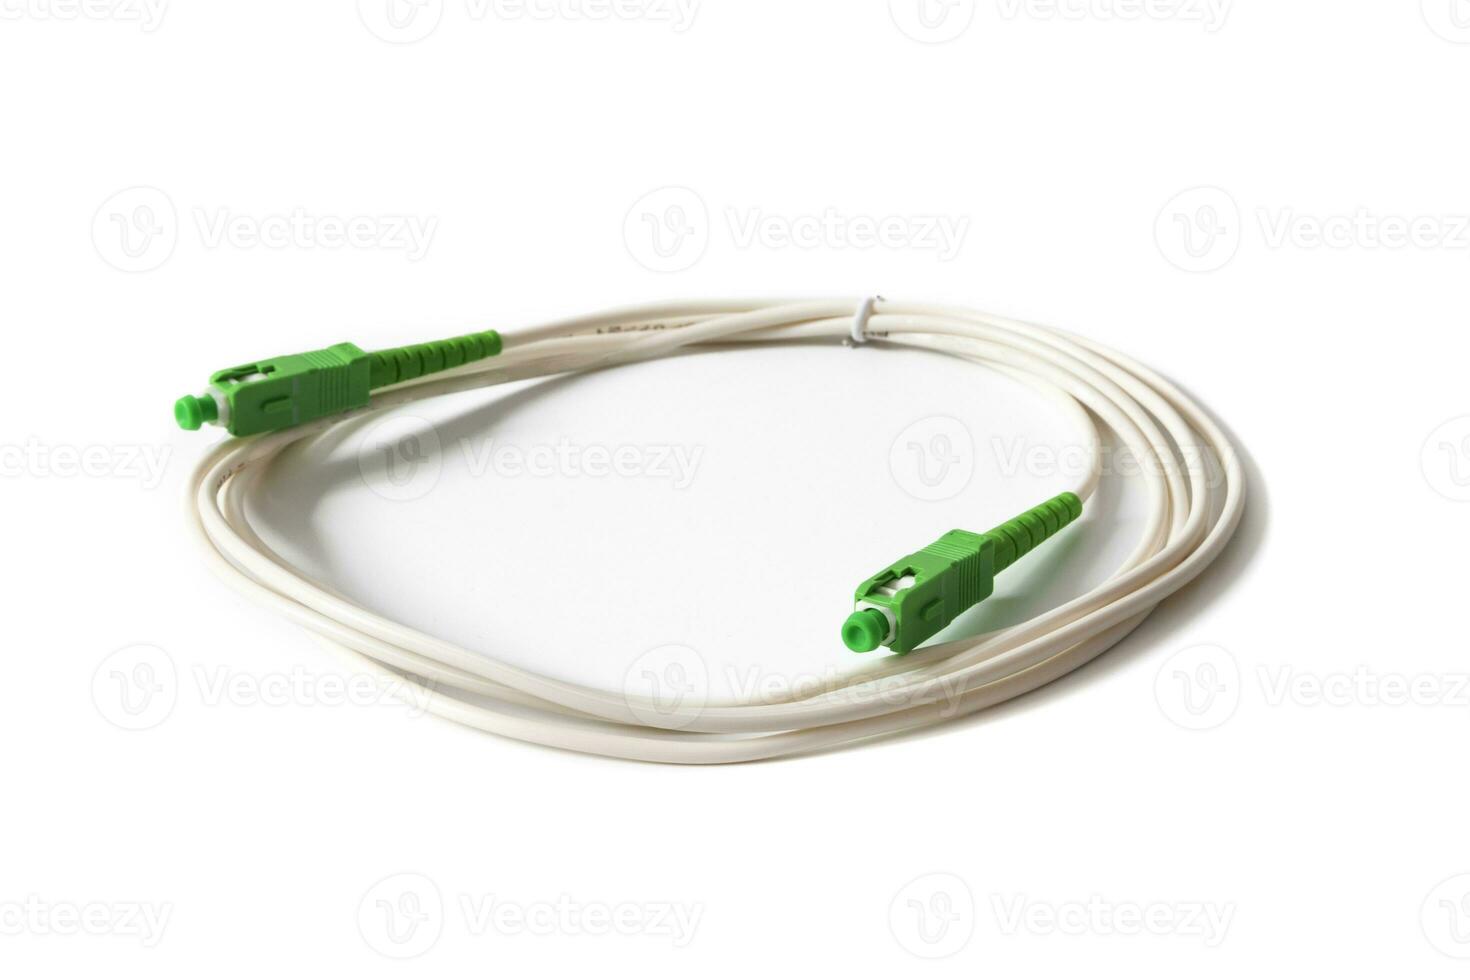 Fiber optic cable isolated on white background. Fiber optic cables are made of glass filaments, each with the capacity to transmit digital data modulated in light waves. photo